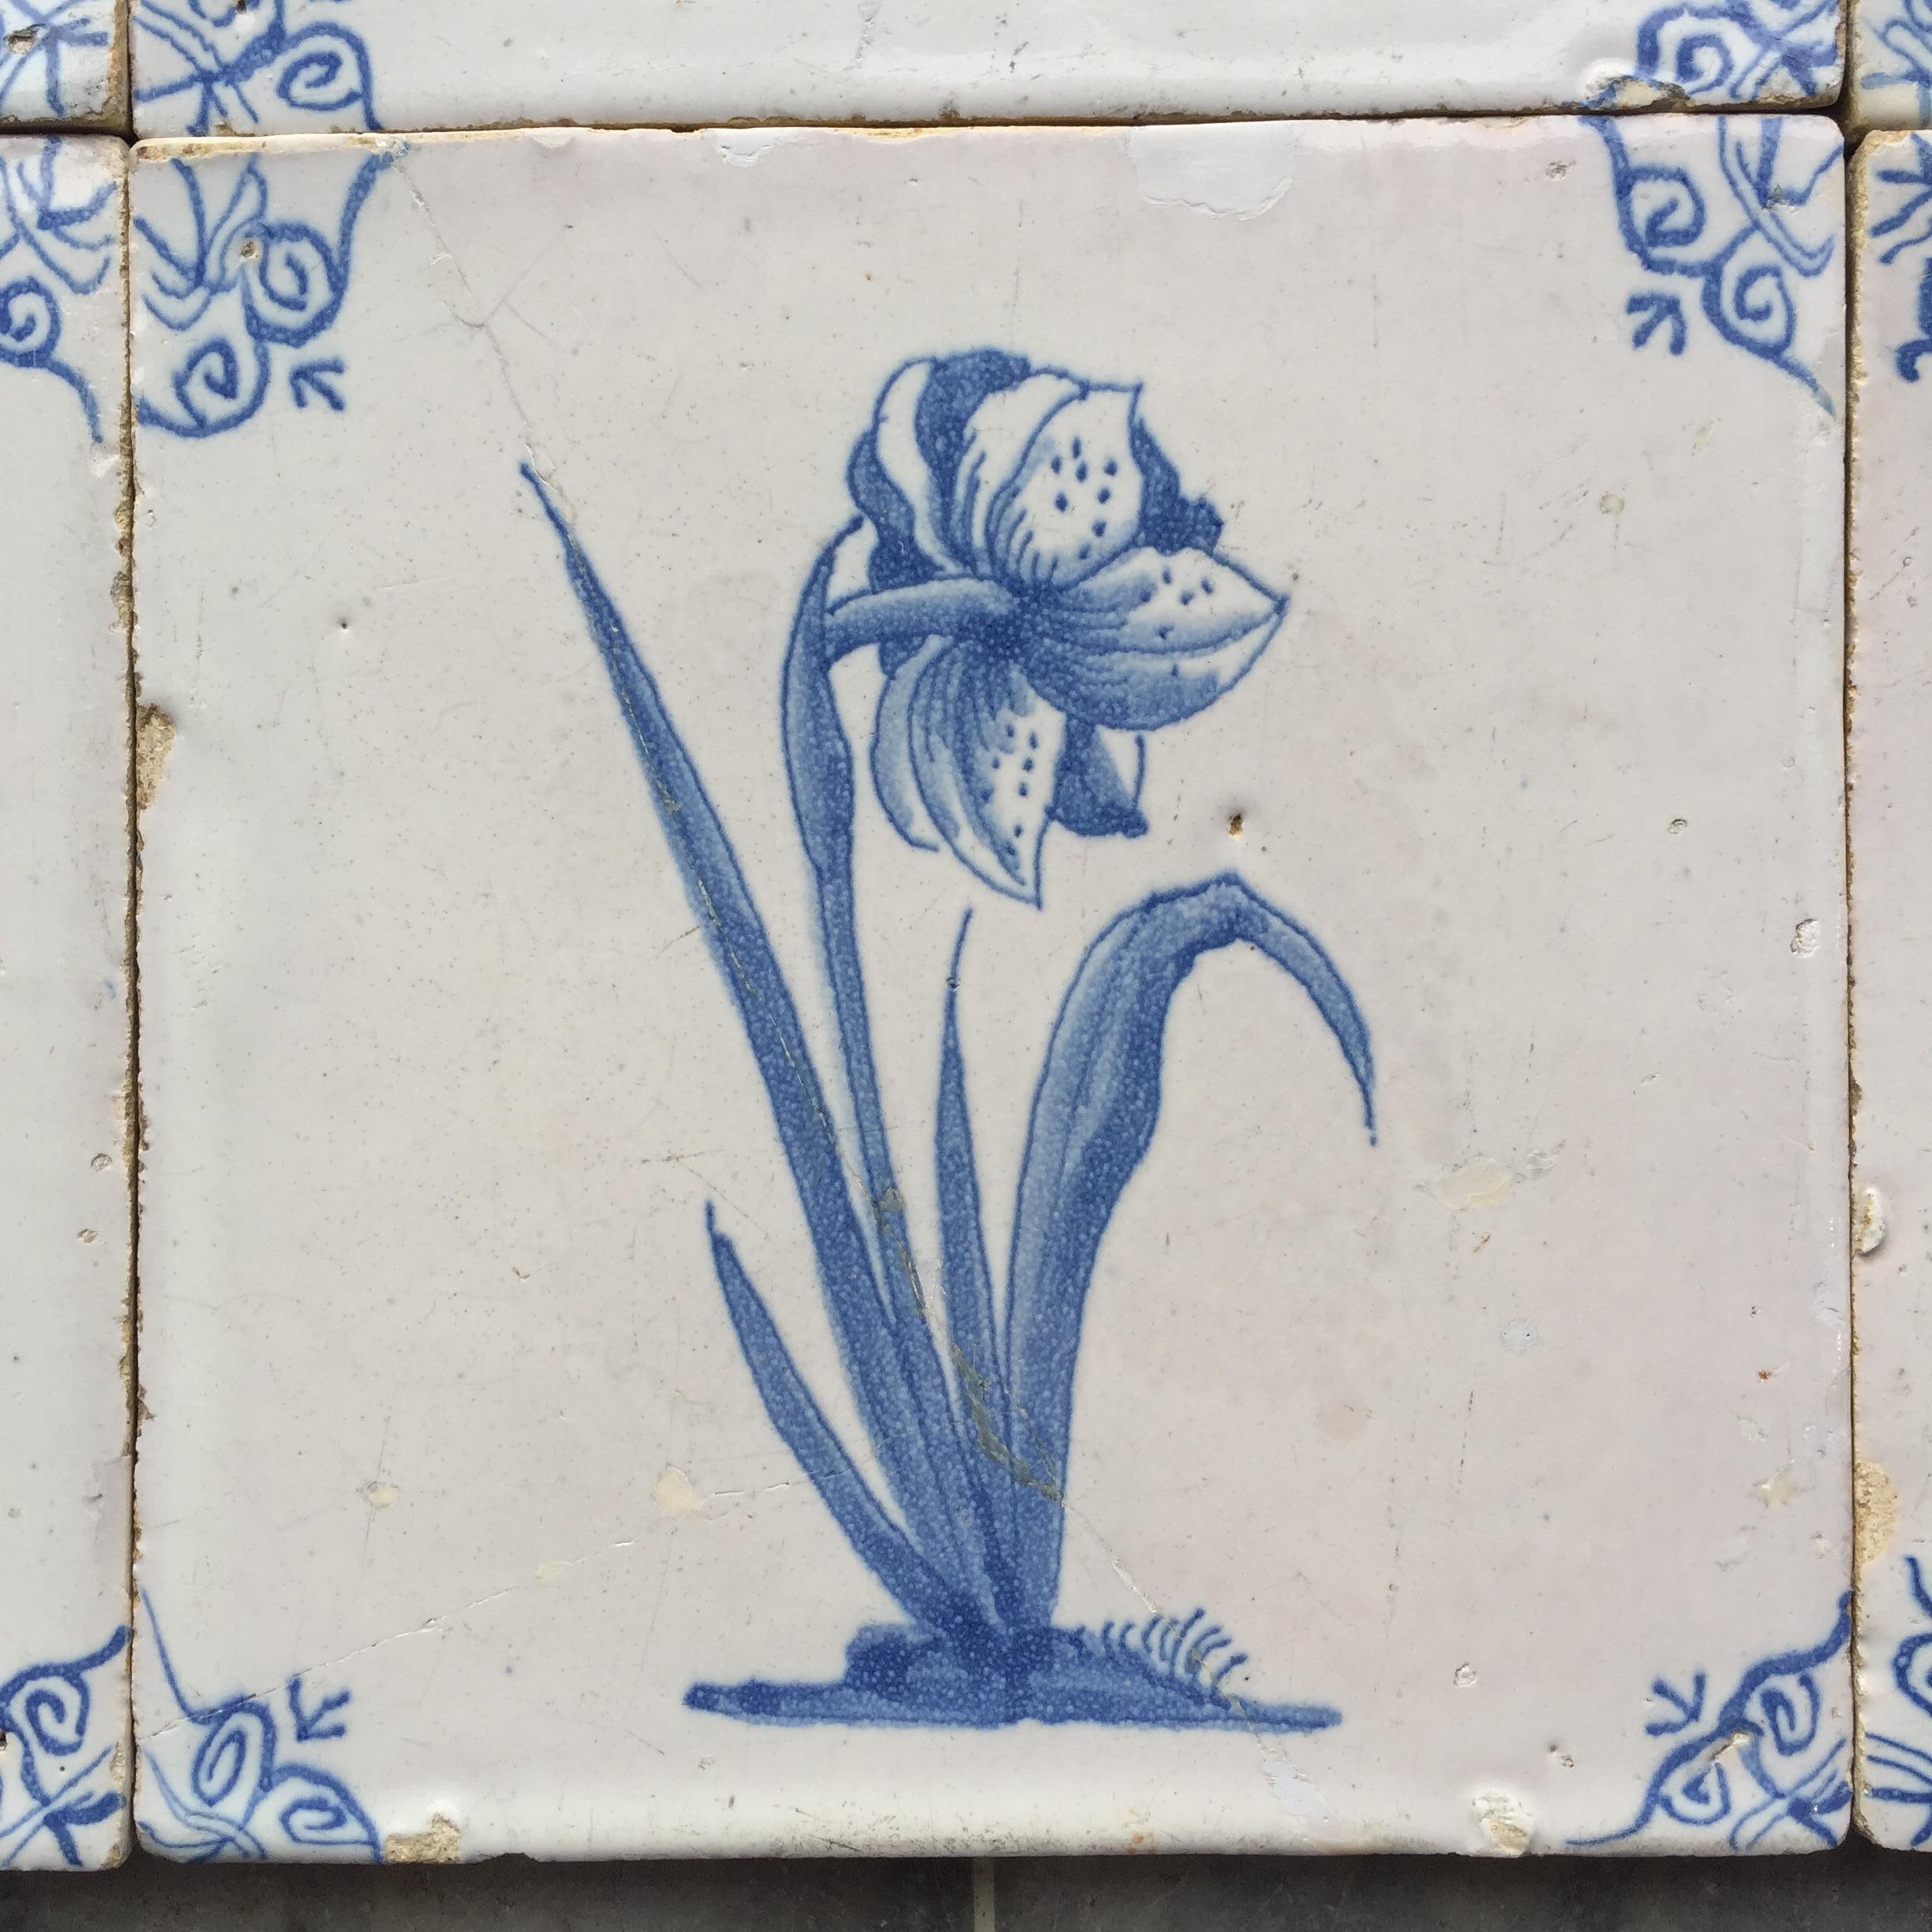 Rare Set of 12 Dutch Delft Tiles with Flowers and Insects, 17th Century 10